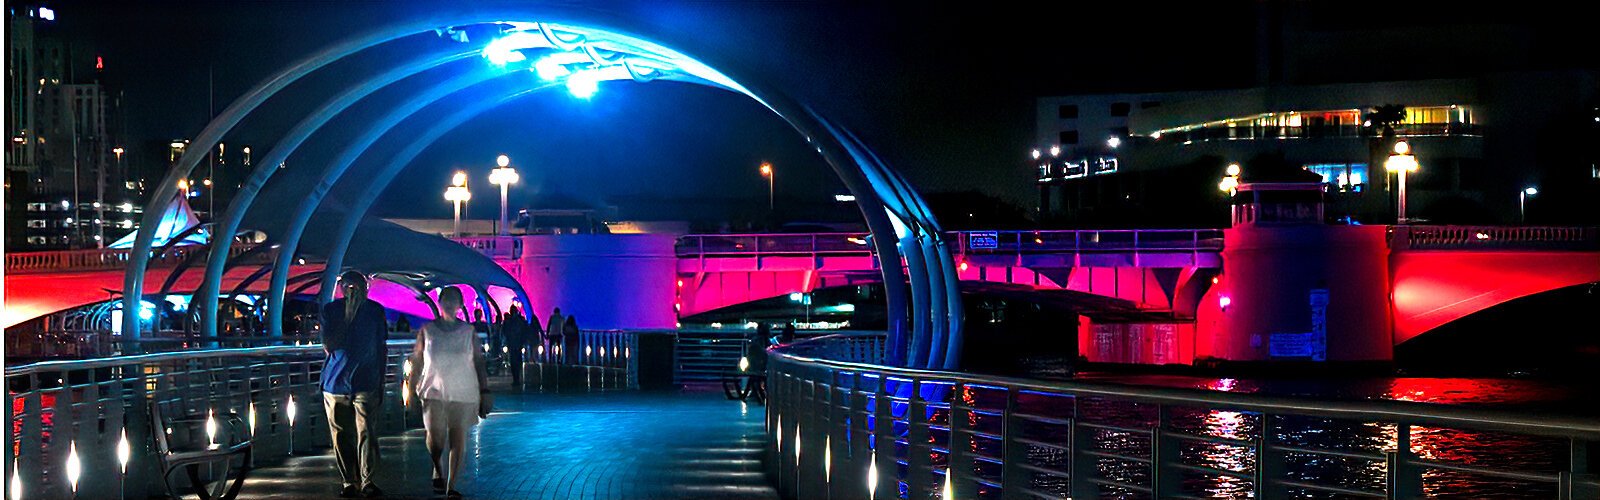 Walking the Tampa Riverwalk is a great choice to connect to the participating venues while enjoying the colorful lighting display on the architecture.